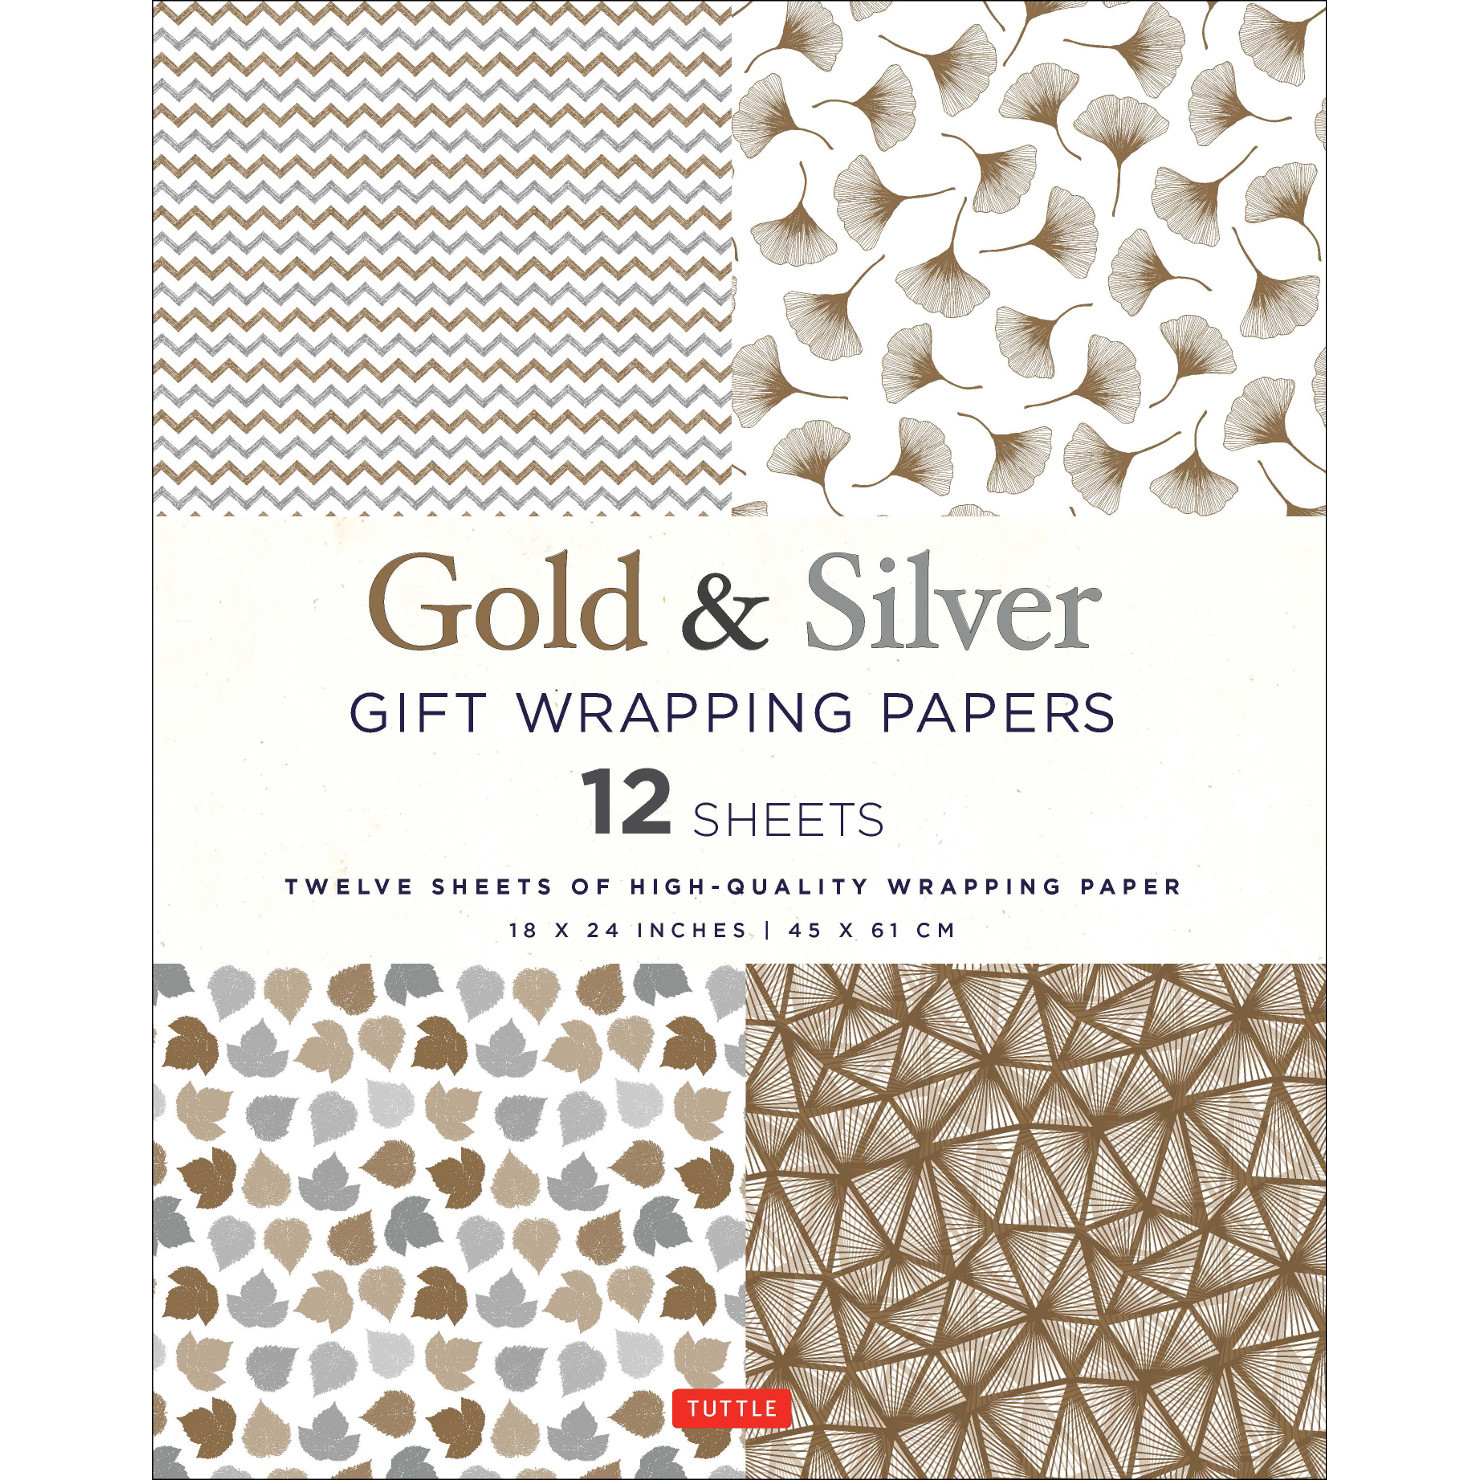 Black & Gold Gift Wrapping Papers - 12 Sheets (9780804852104) - Tuttle  Publishing